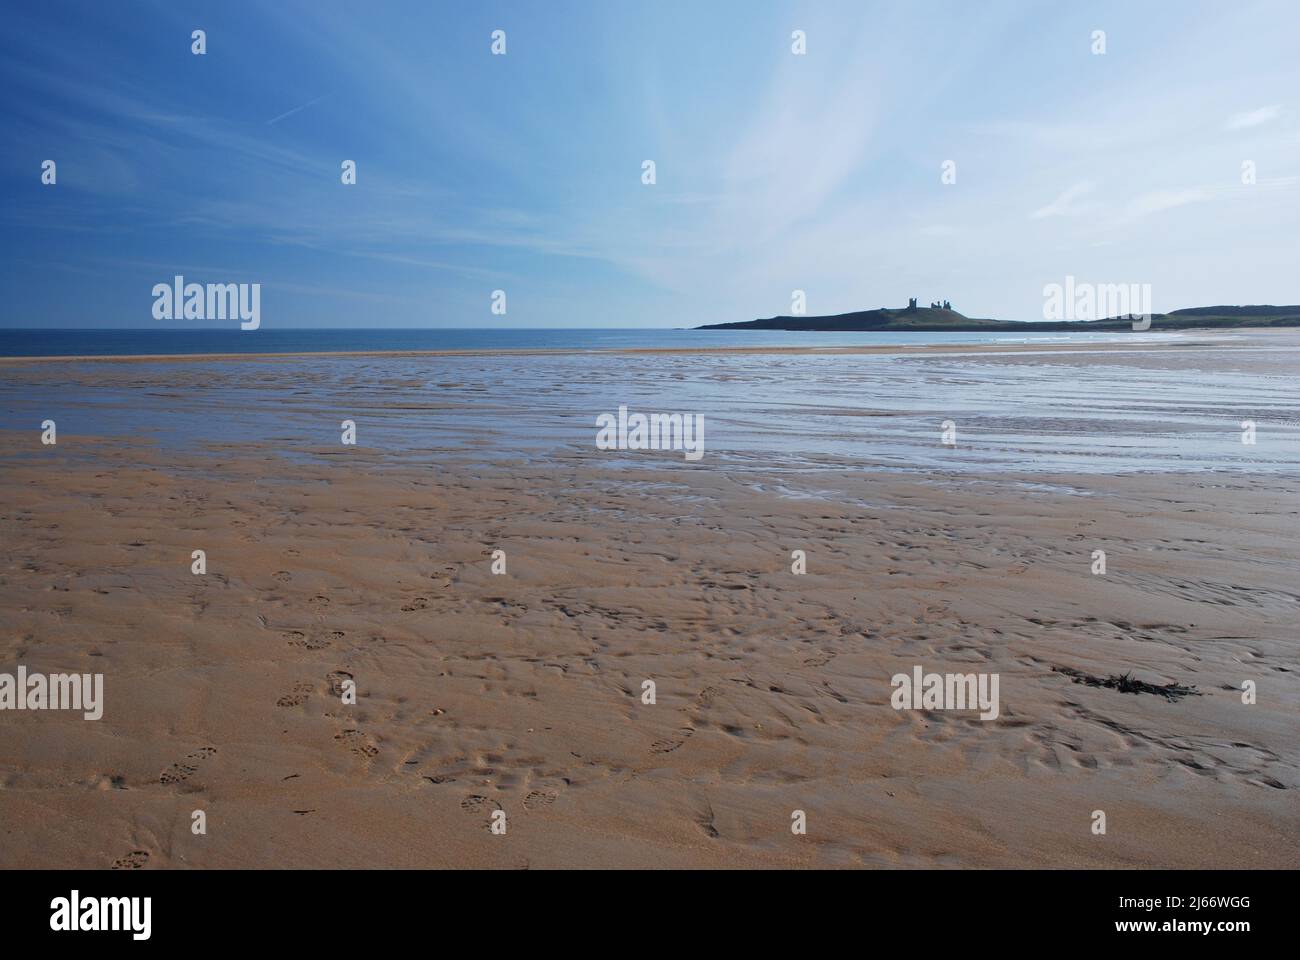 Panoramic style image of a distant historic Dunstanburgh castle on the horizon with foreground of the wide open and sandy beach of Embleton Bay Stock Photo